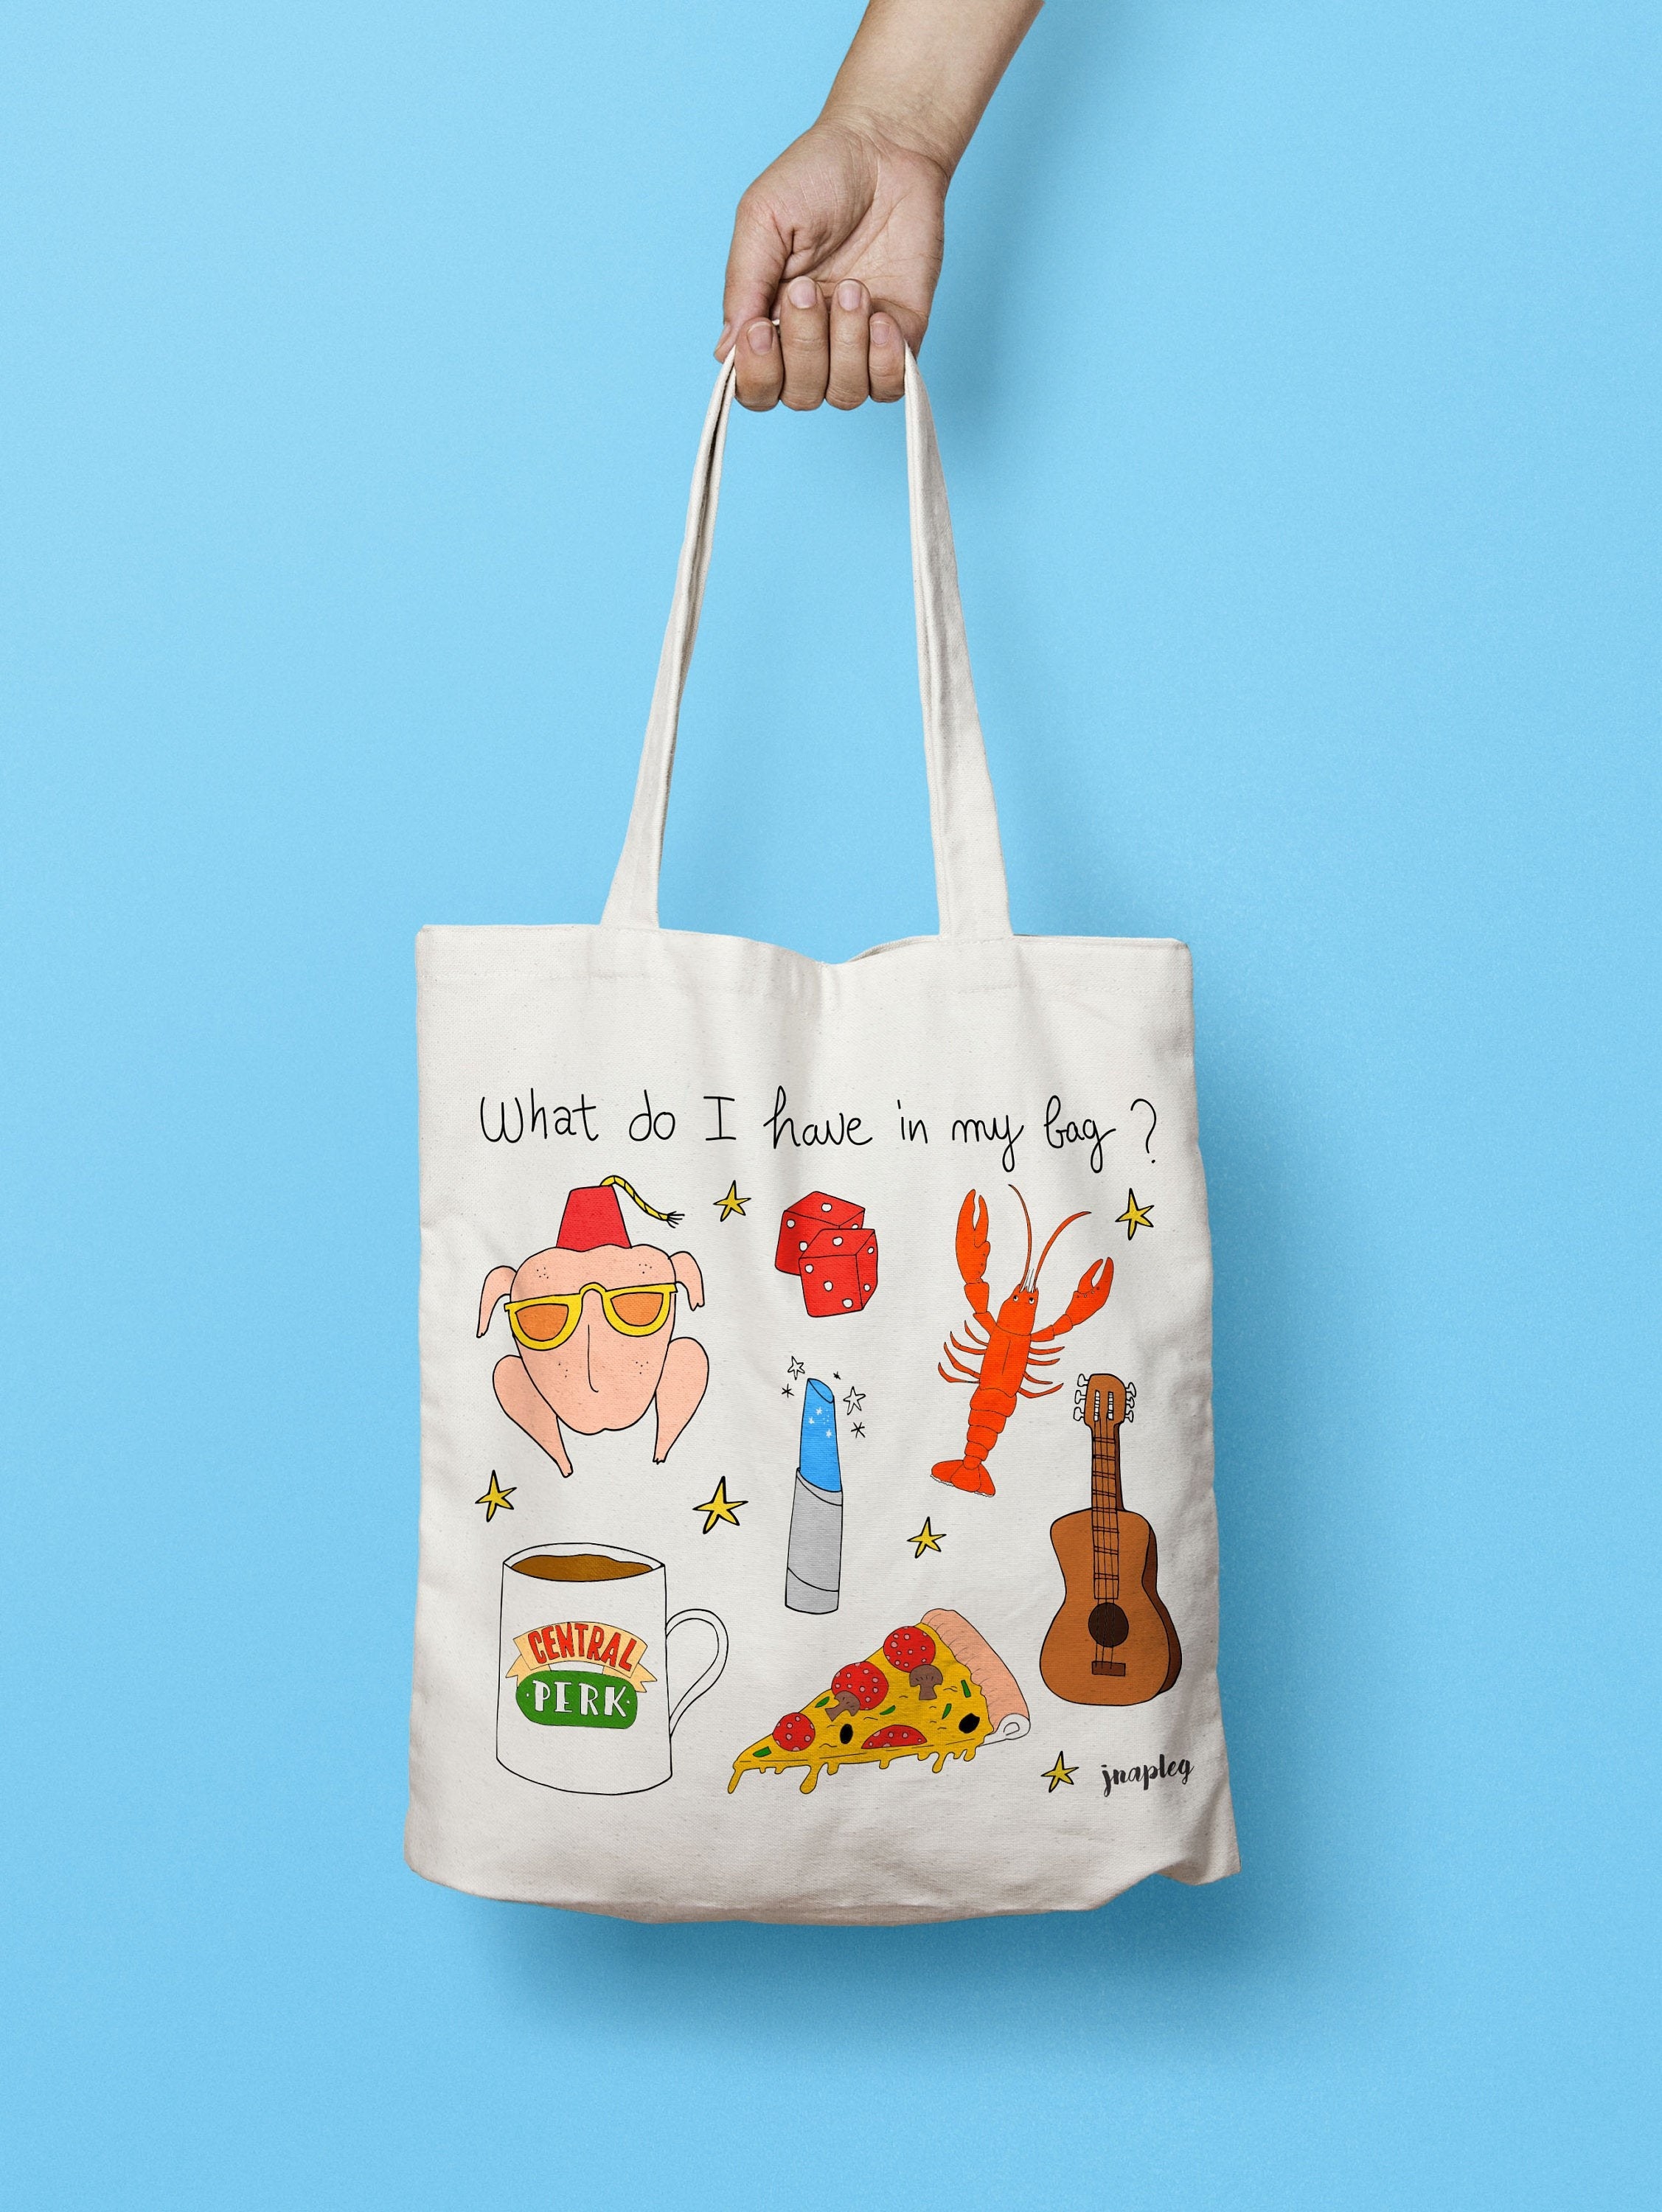 55th Birthday Gift Tote Shopping Cotton Novelty Bag Wreaking Havoc Since 1964 